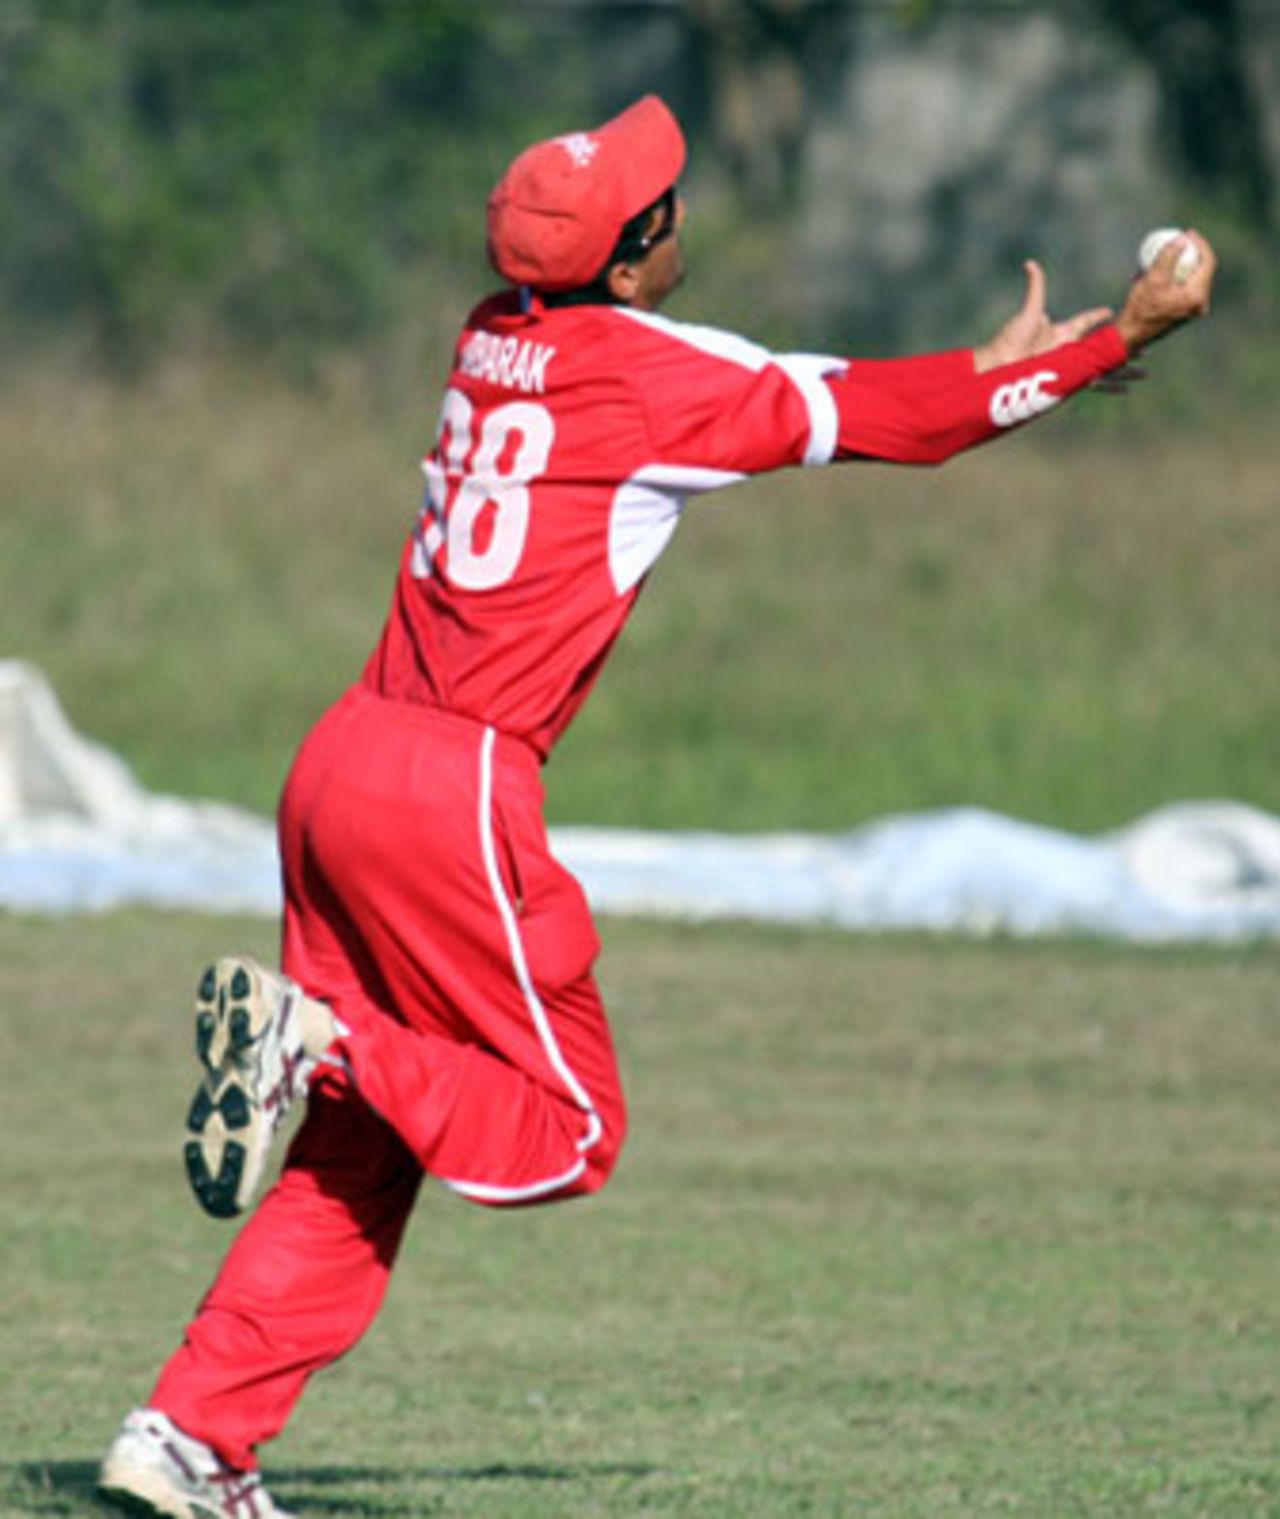 Tabarak Dar takes a brilliant one-handed catch against Italy. ICC WCL Division 4, Tanzania, 04.10.2008